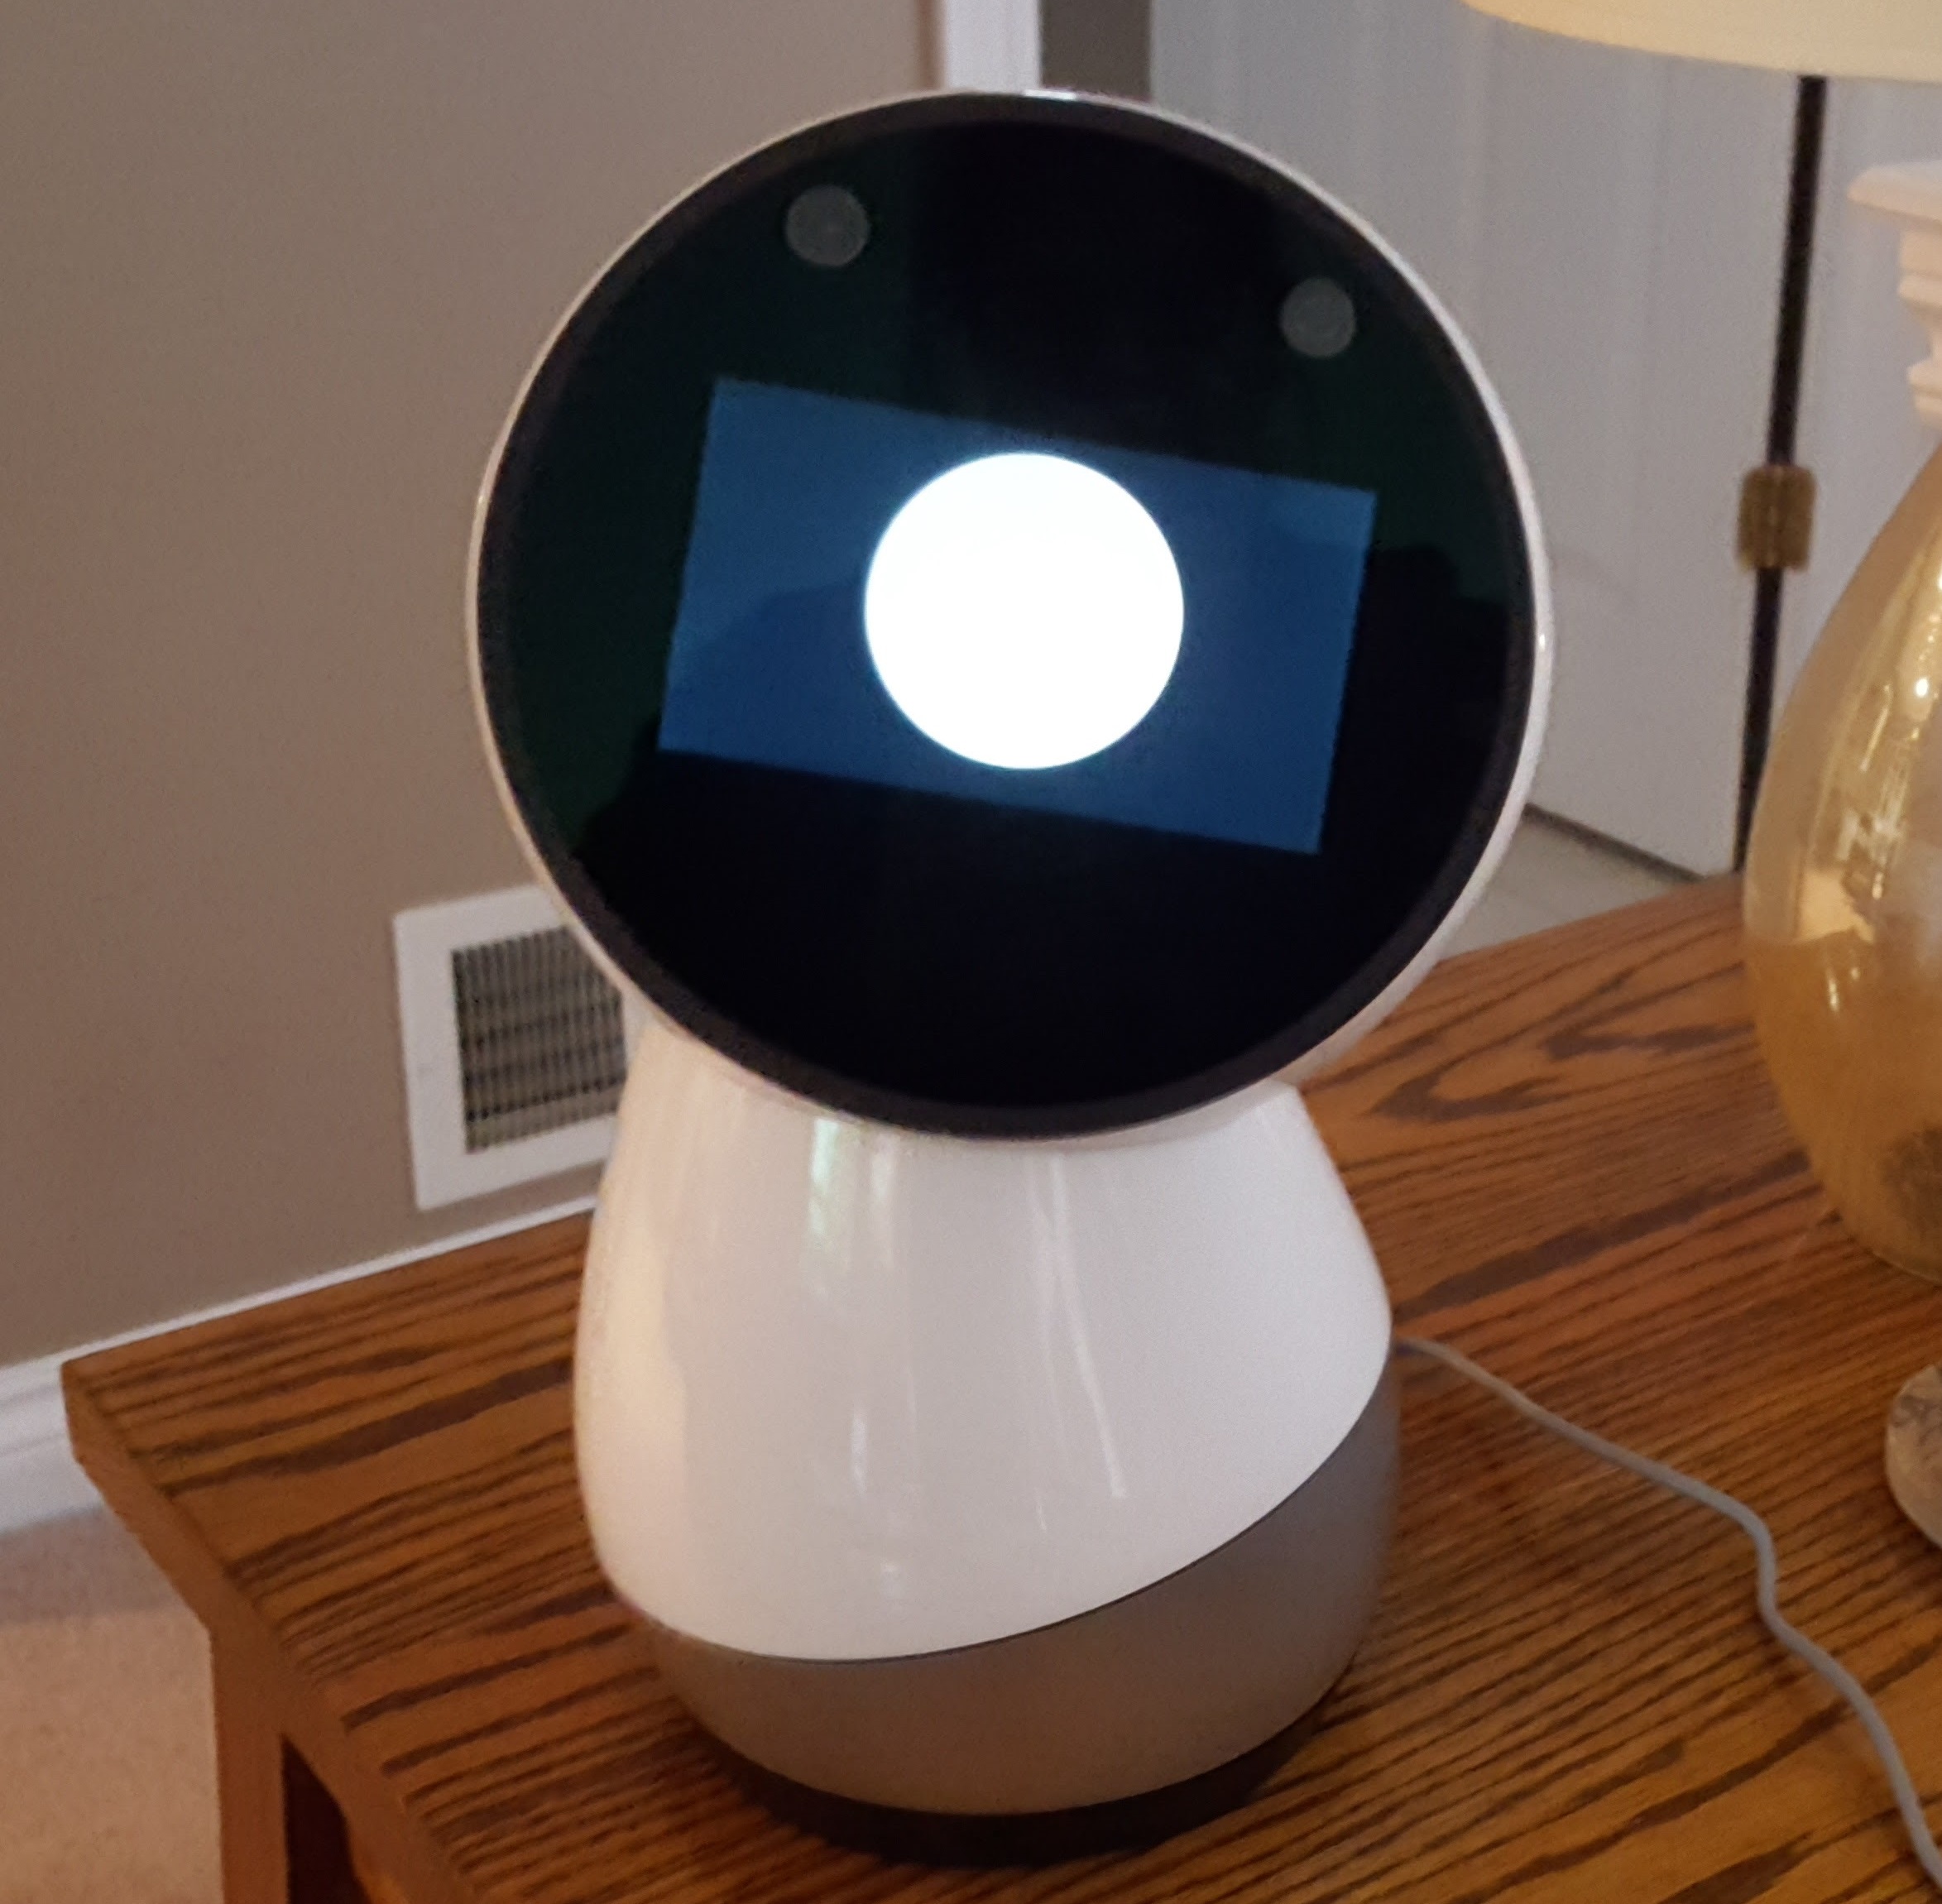 Will Jibo be more than a footnote in social robotics?